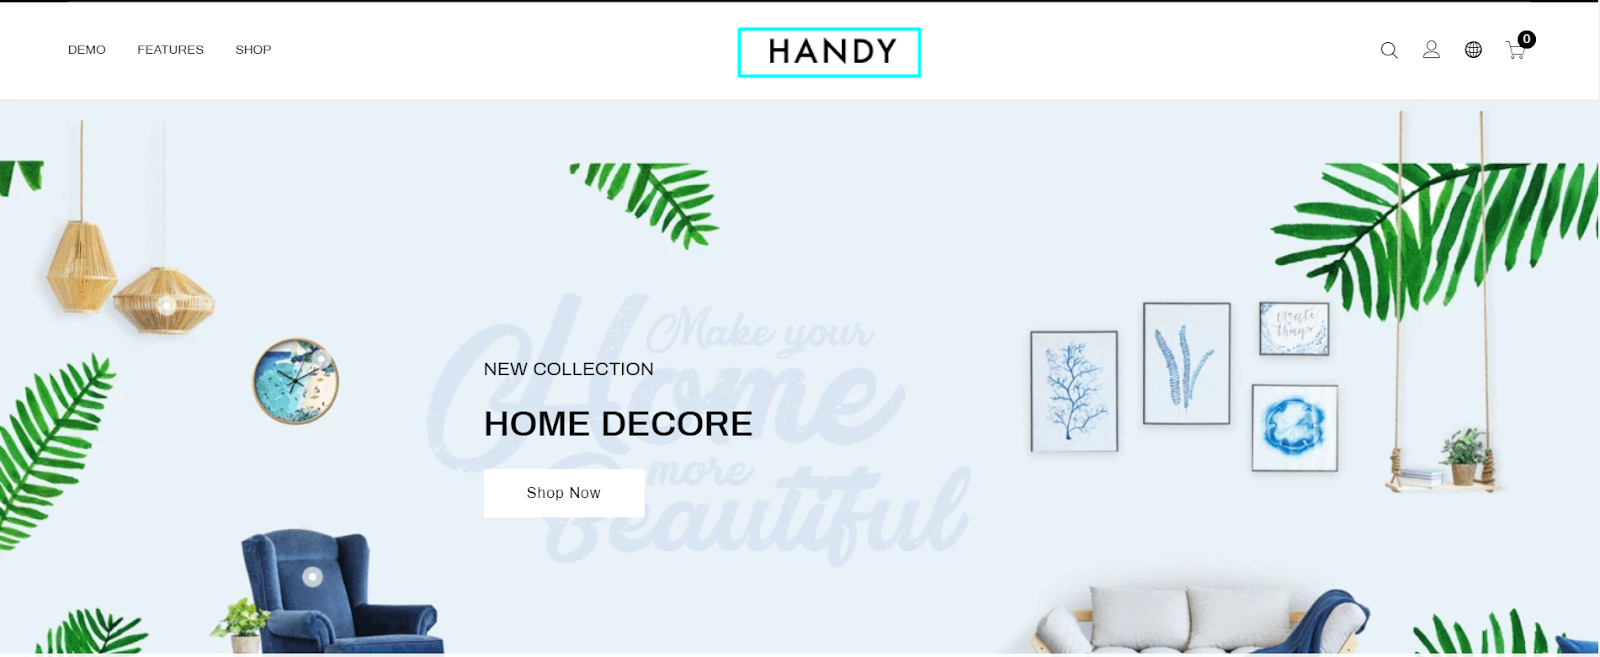 Handy-Handsome-Shopify-Shop-theme